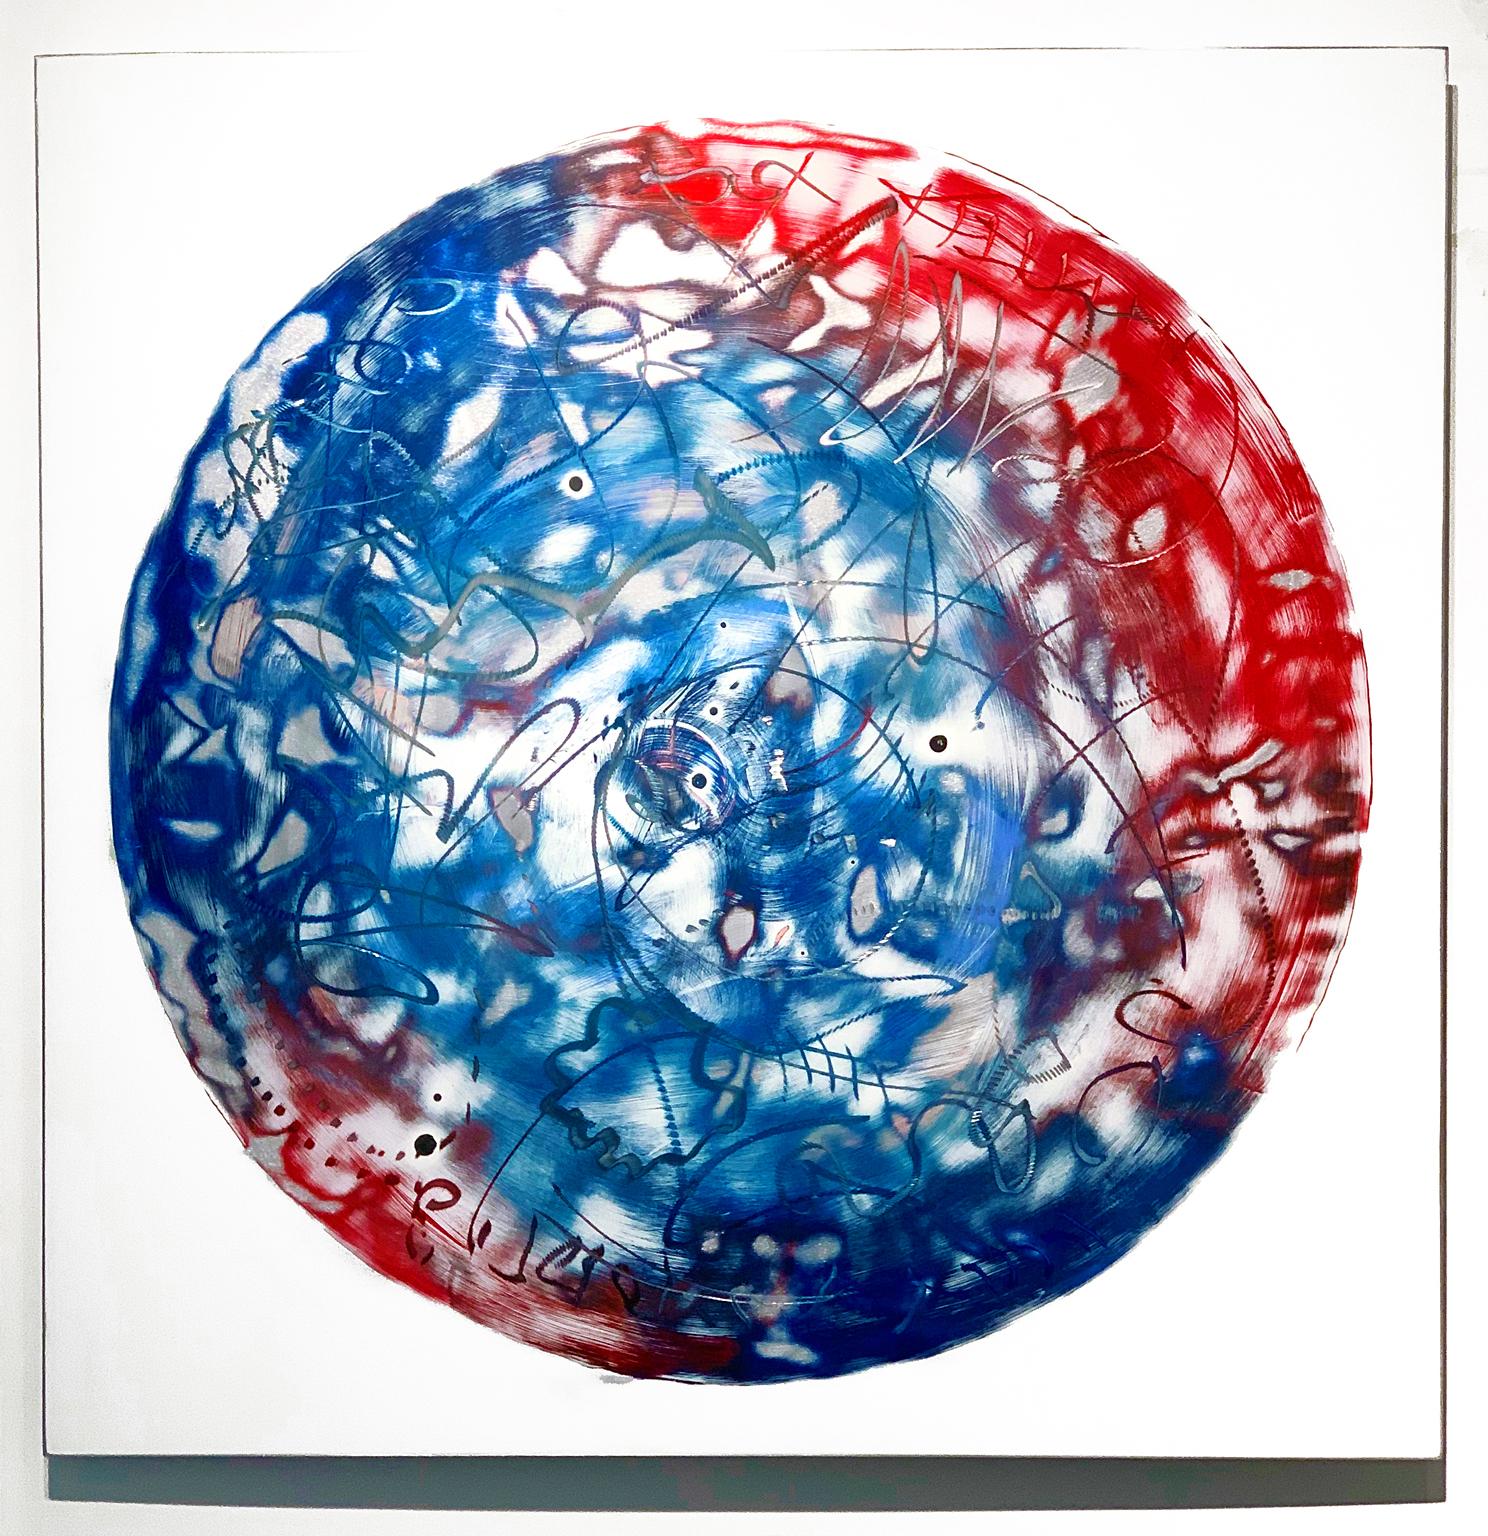 "Patriot", Abstract, Acrylic Painting on Aluminum Panel by Kevin Barrett